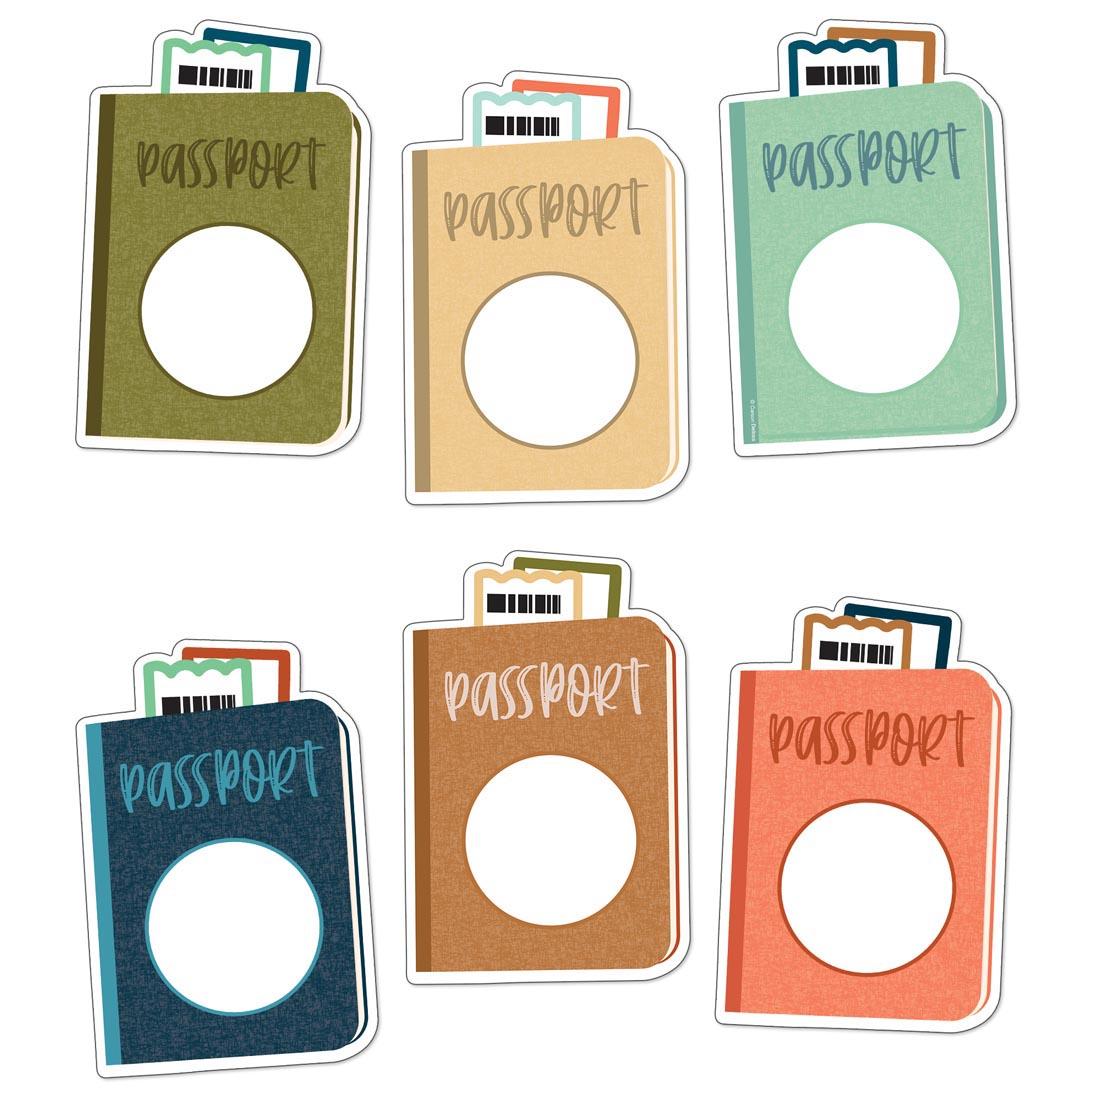 6 Let's Explore Passport Cut-Outs By Carson Dellosa in various colors